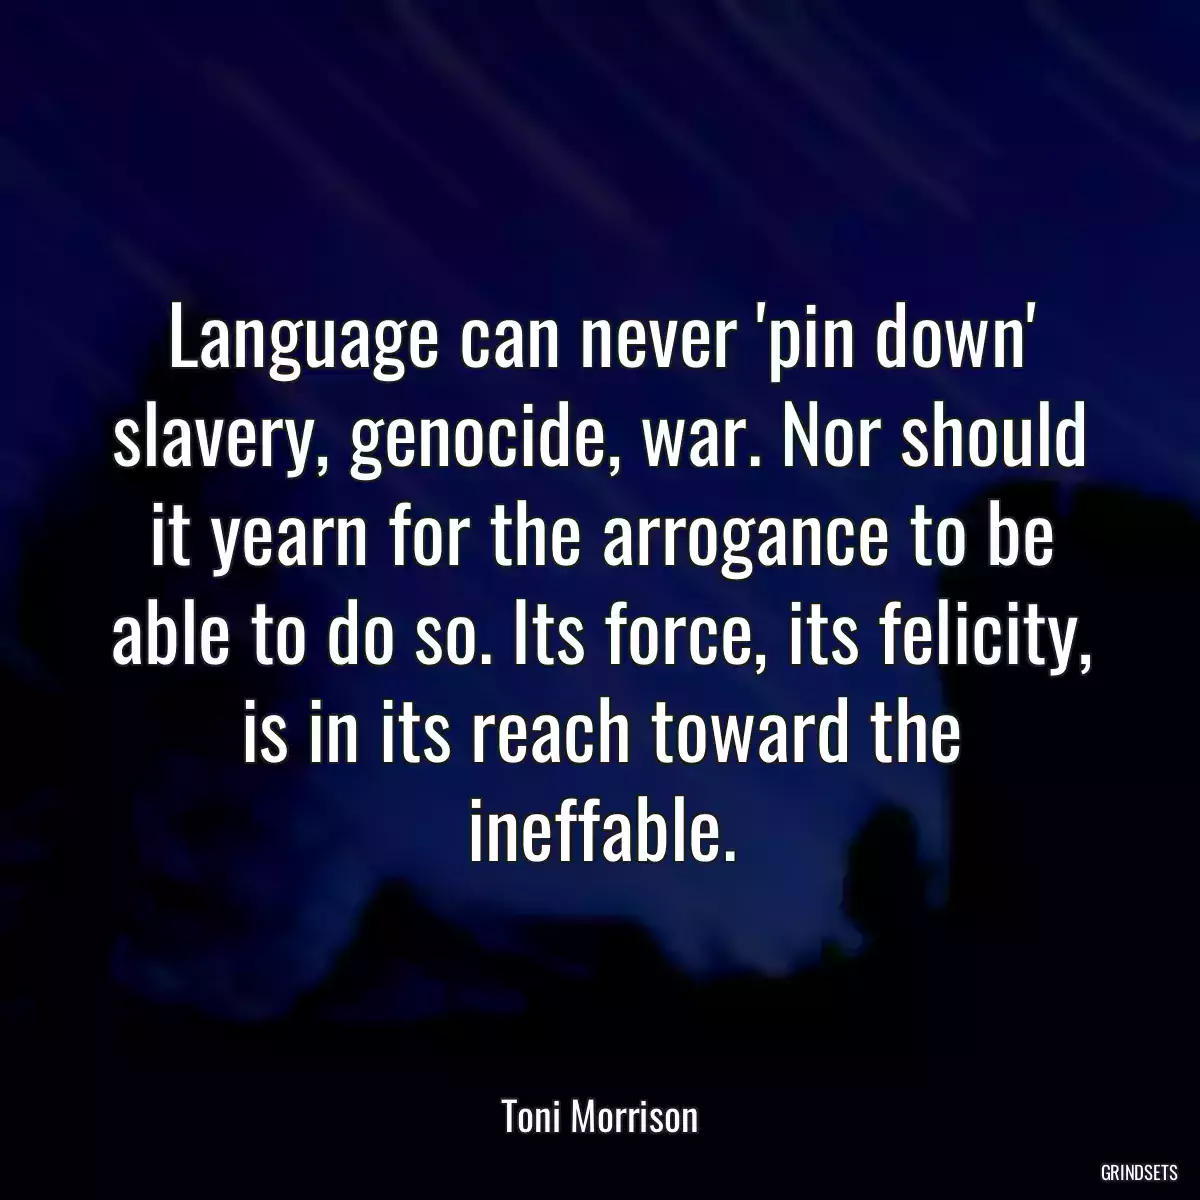 Language can never \'pin down\' slavery, genocide, war. Nor should it yearn for the arrogance to be able to do so. Its force, its felicity, is in its reach toward the ineffable.